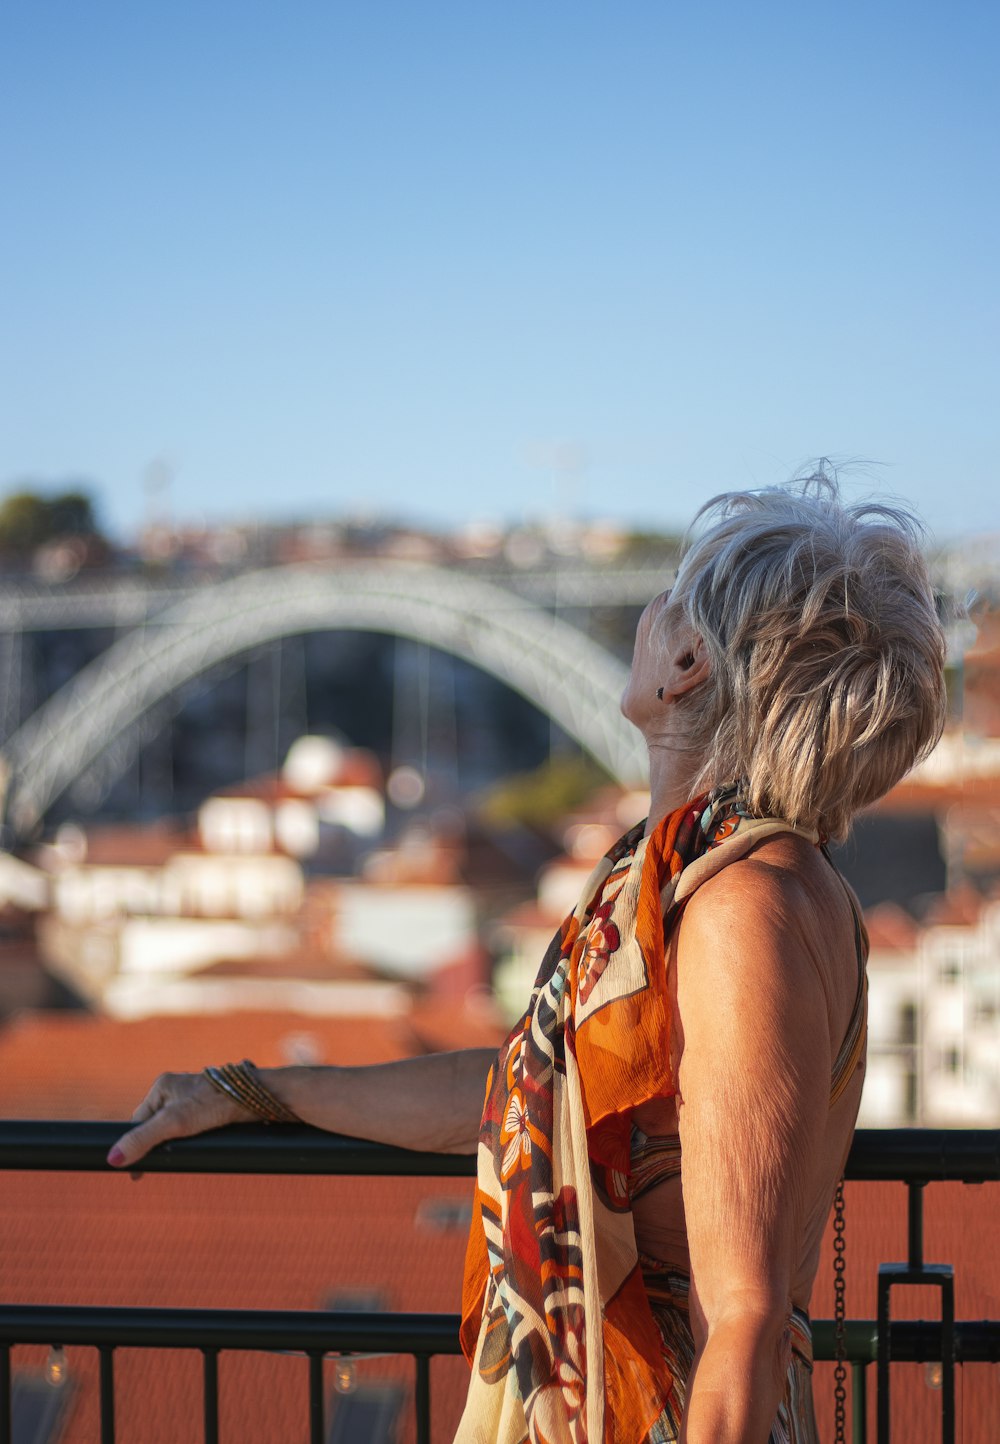 a woman standing on a balcony with a view of a bridge